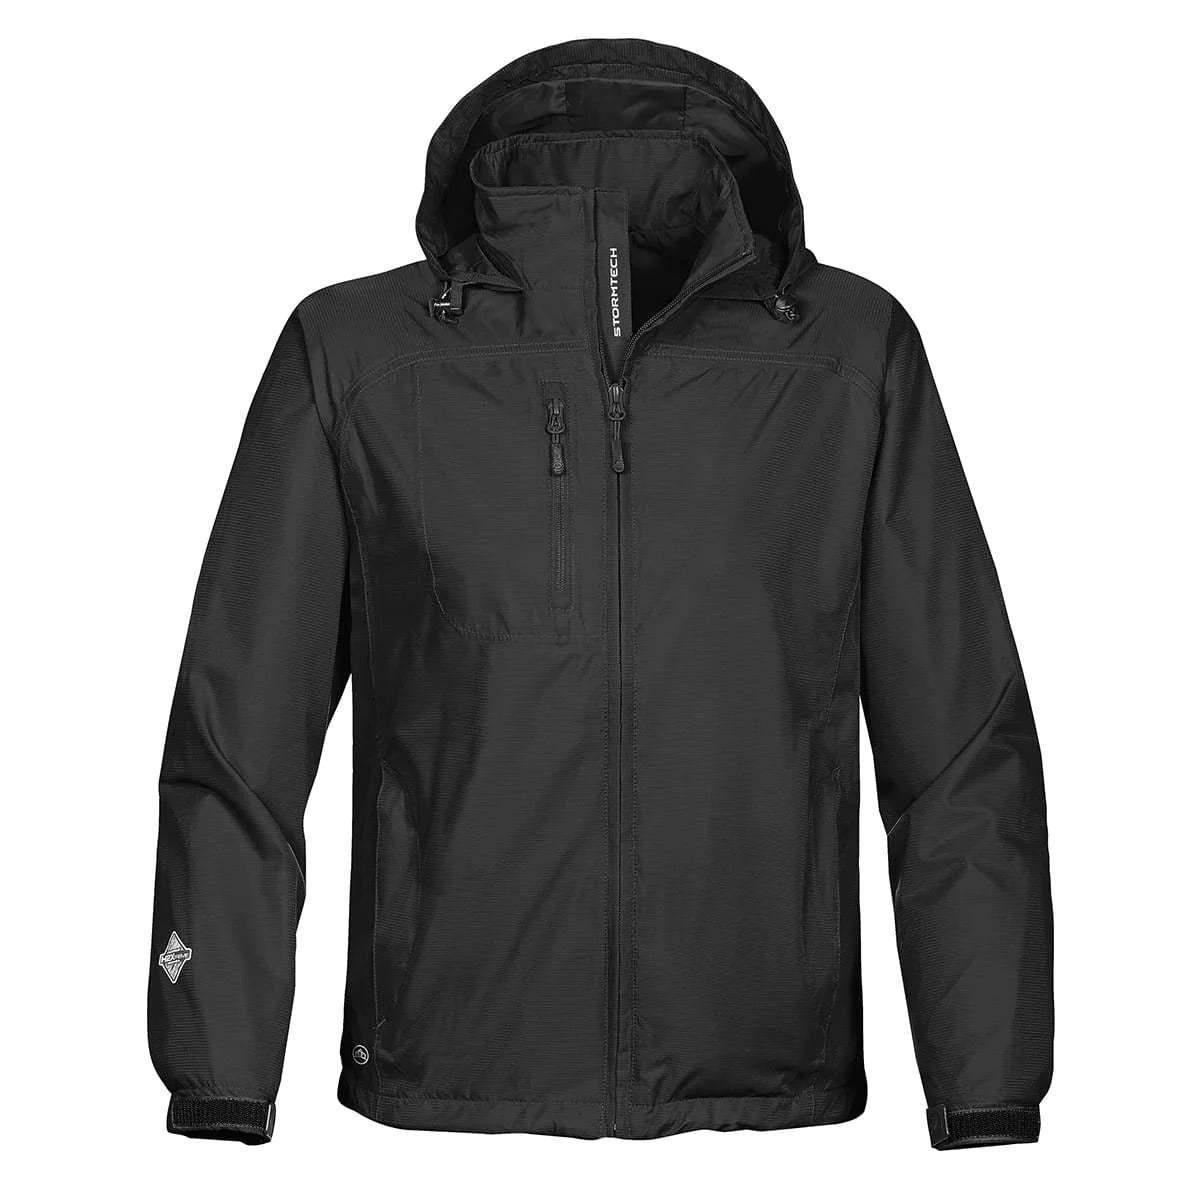 Men’s Stratus Lightweight Shell by Stormtech - Promotions Only Group Limited